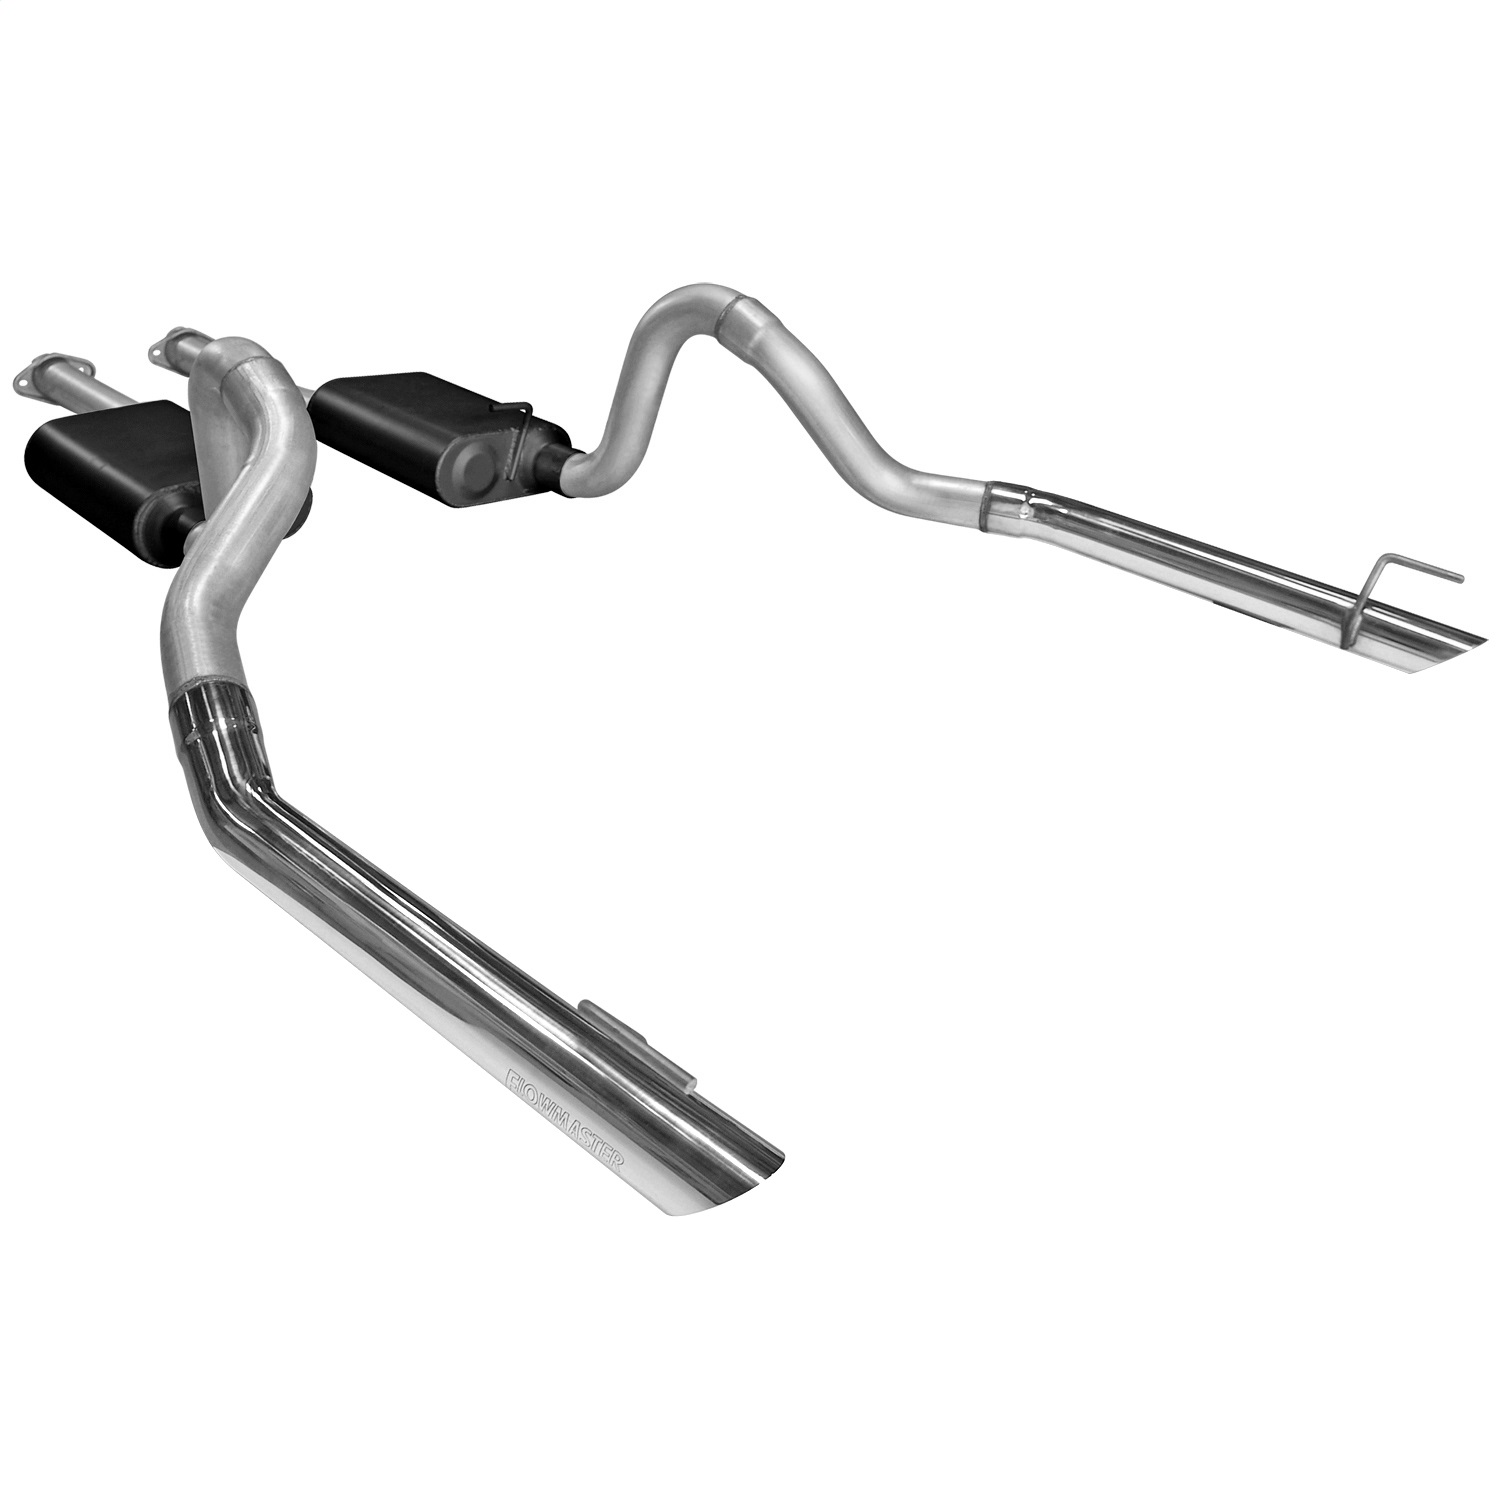 Flowmaster Flowmaster 17215 American Thunder Cat Back Exhaust System Fits 98 Mustang